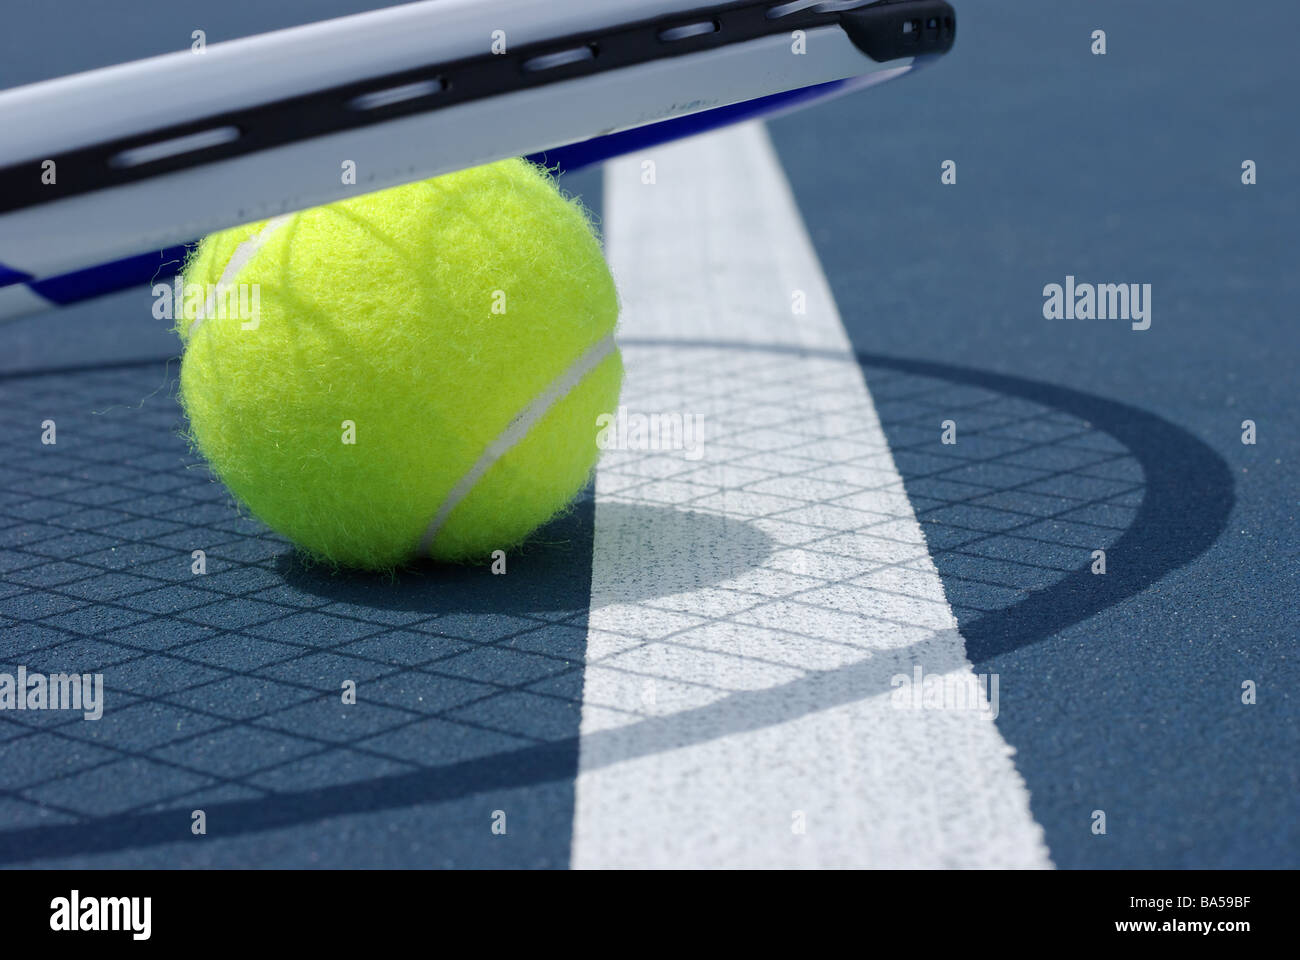 Tennis ball and racket on hard surface Stock Photo